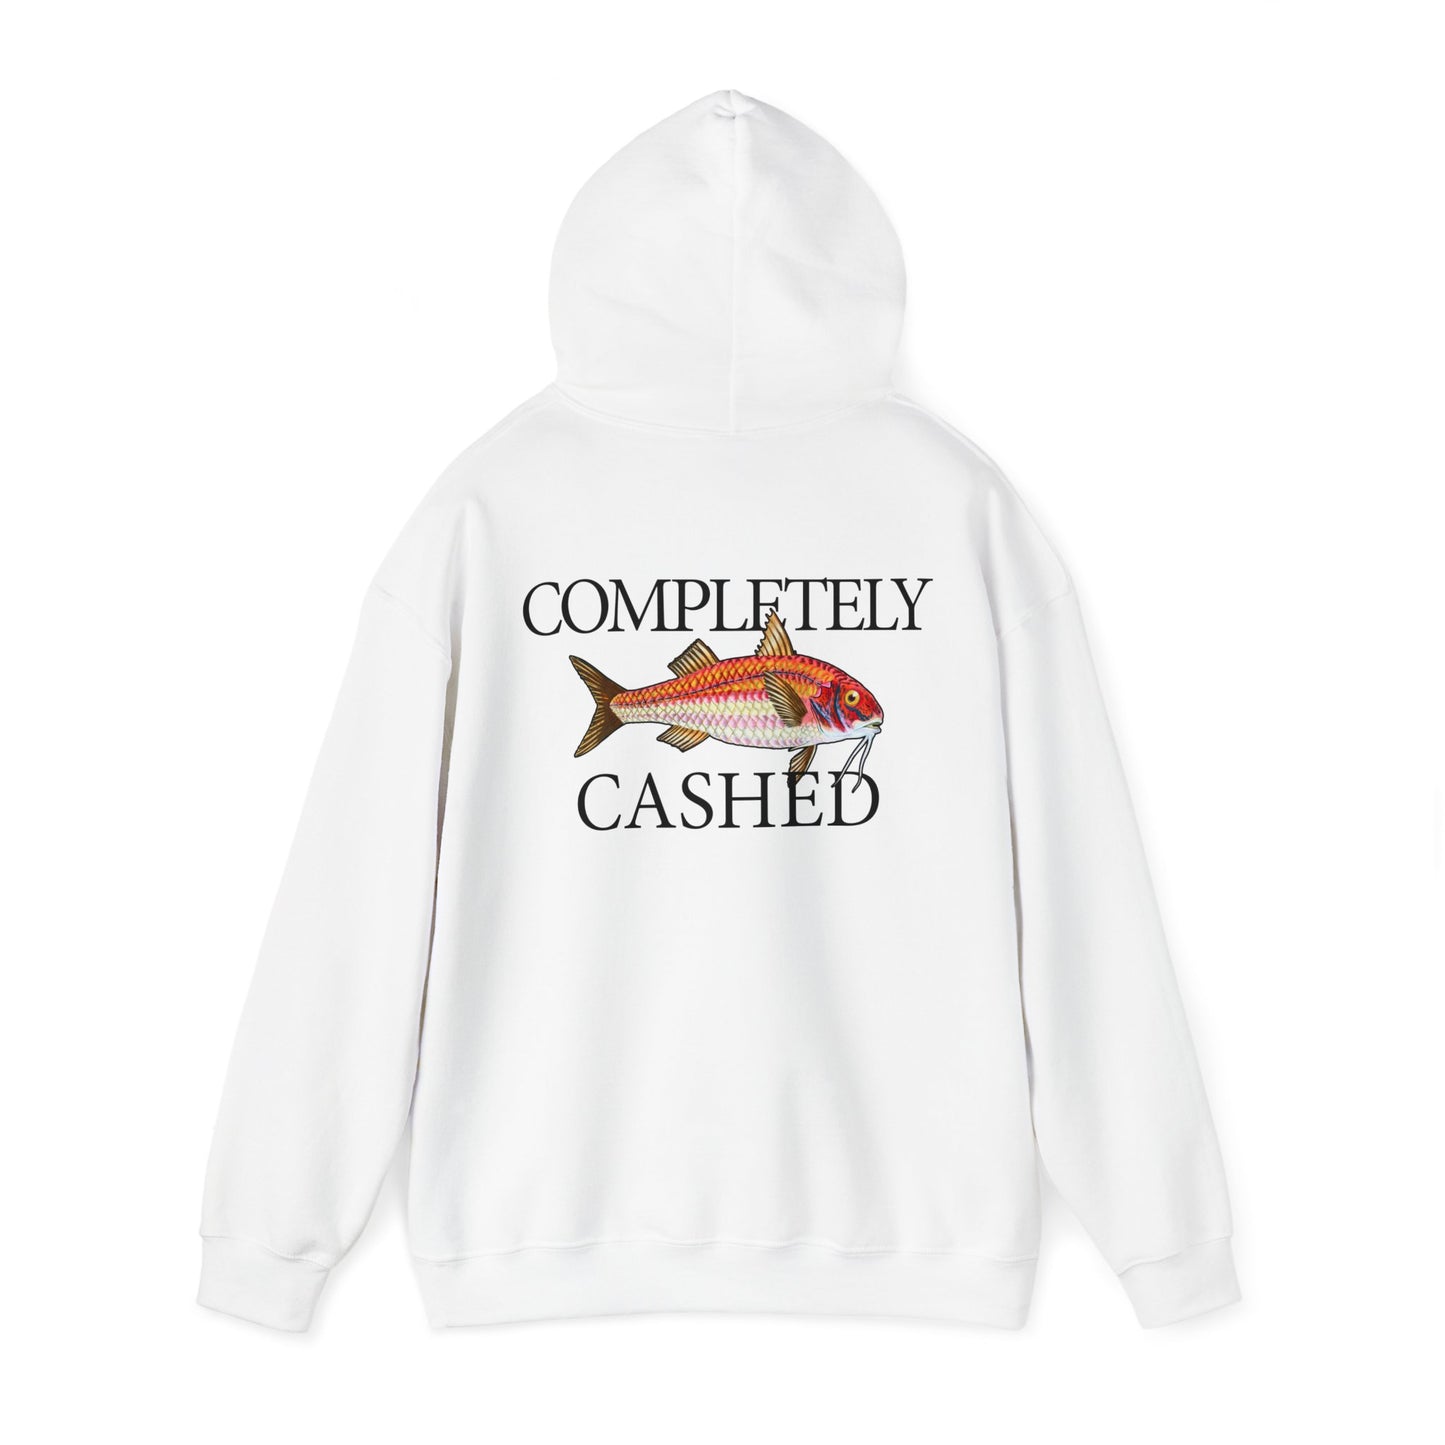 Completely Cashed - Hooded Edition